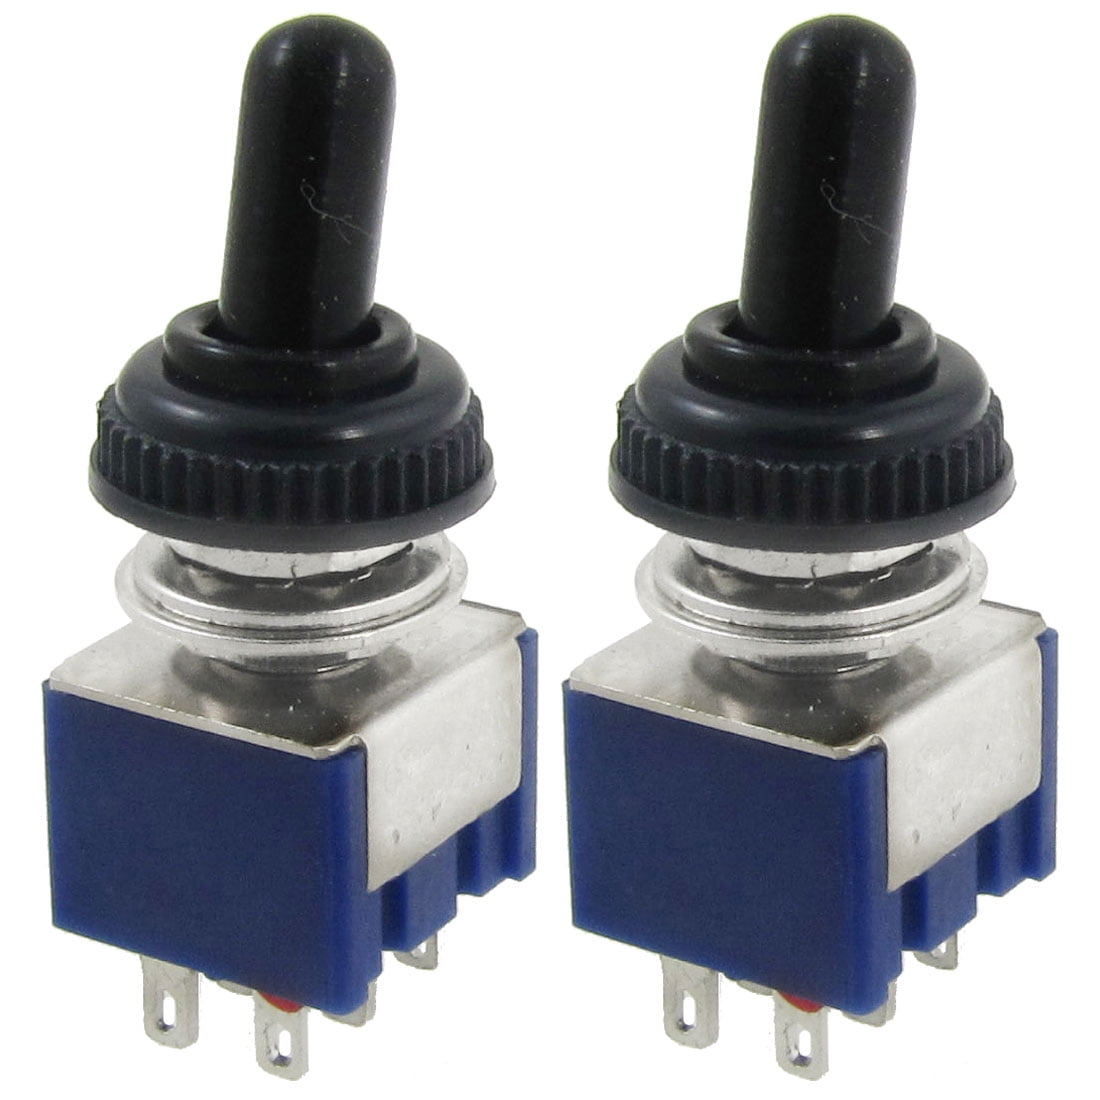 New Toggle Switch 125V 6A On/Off/On DPDT 6 Pin Mini W/ Waterproof Rubber Cap 